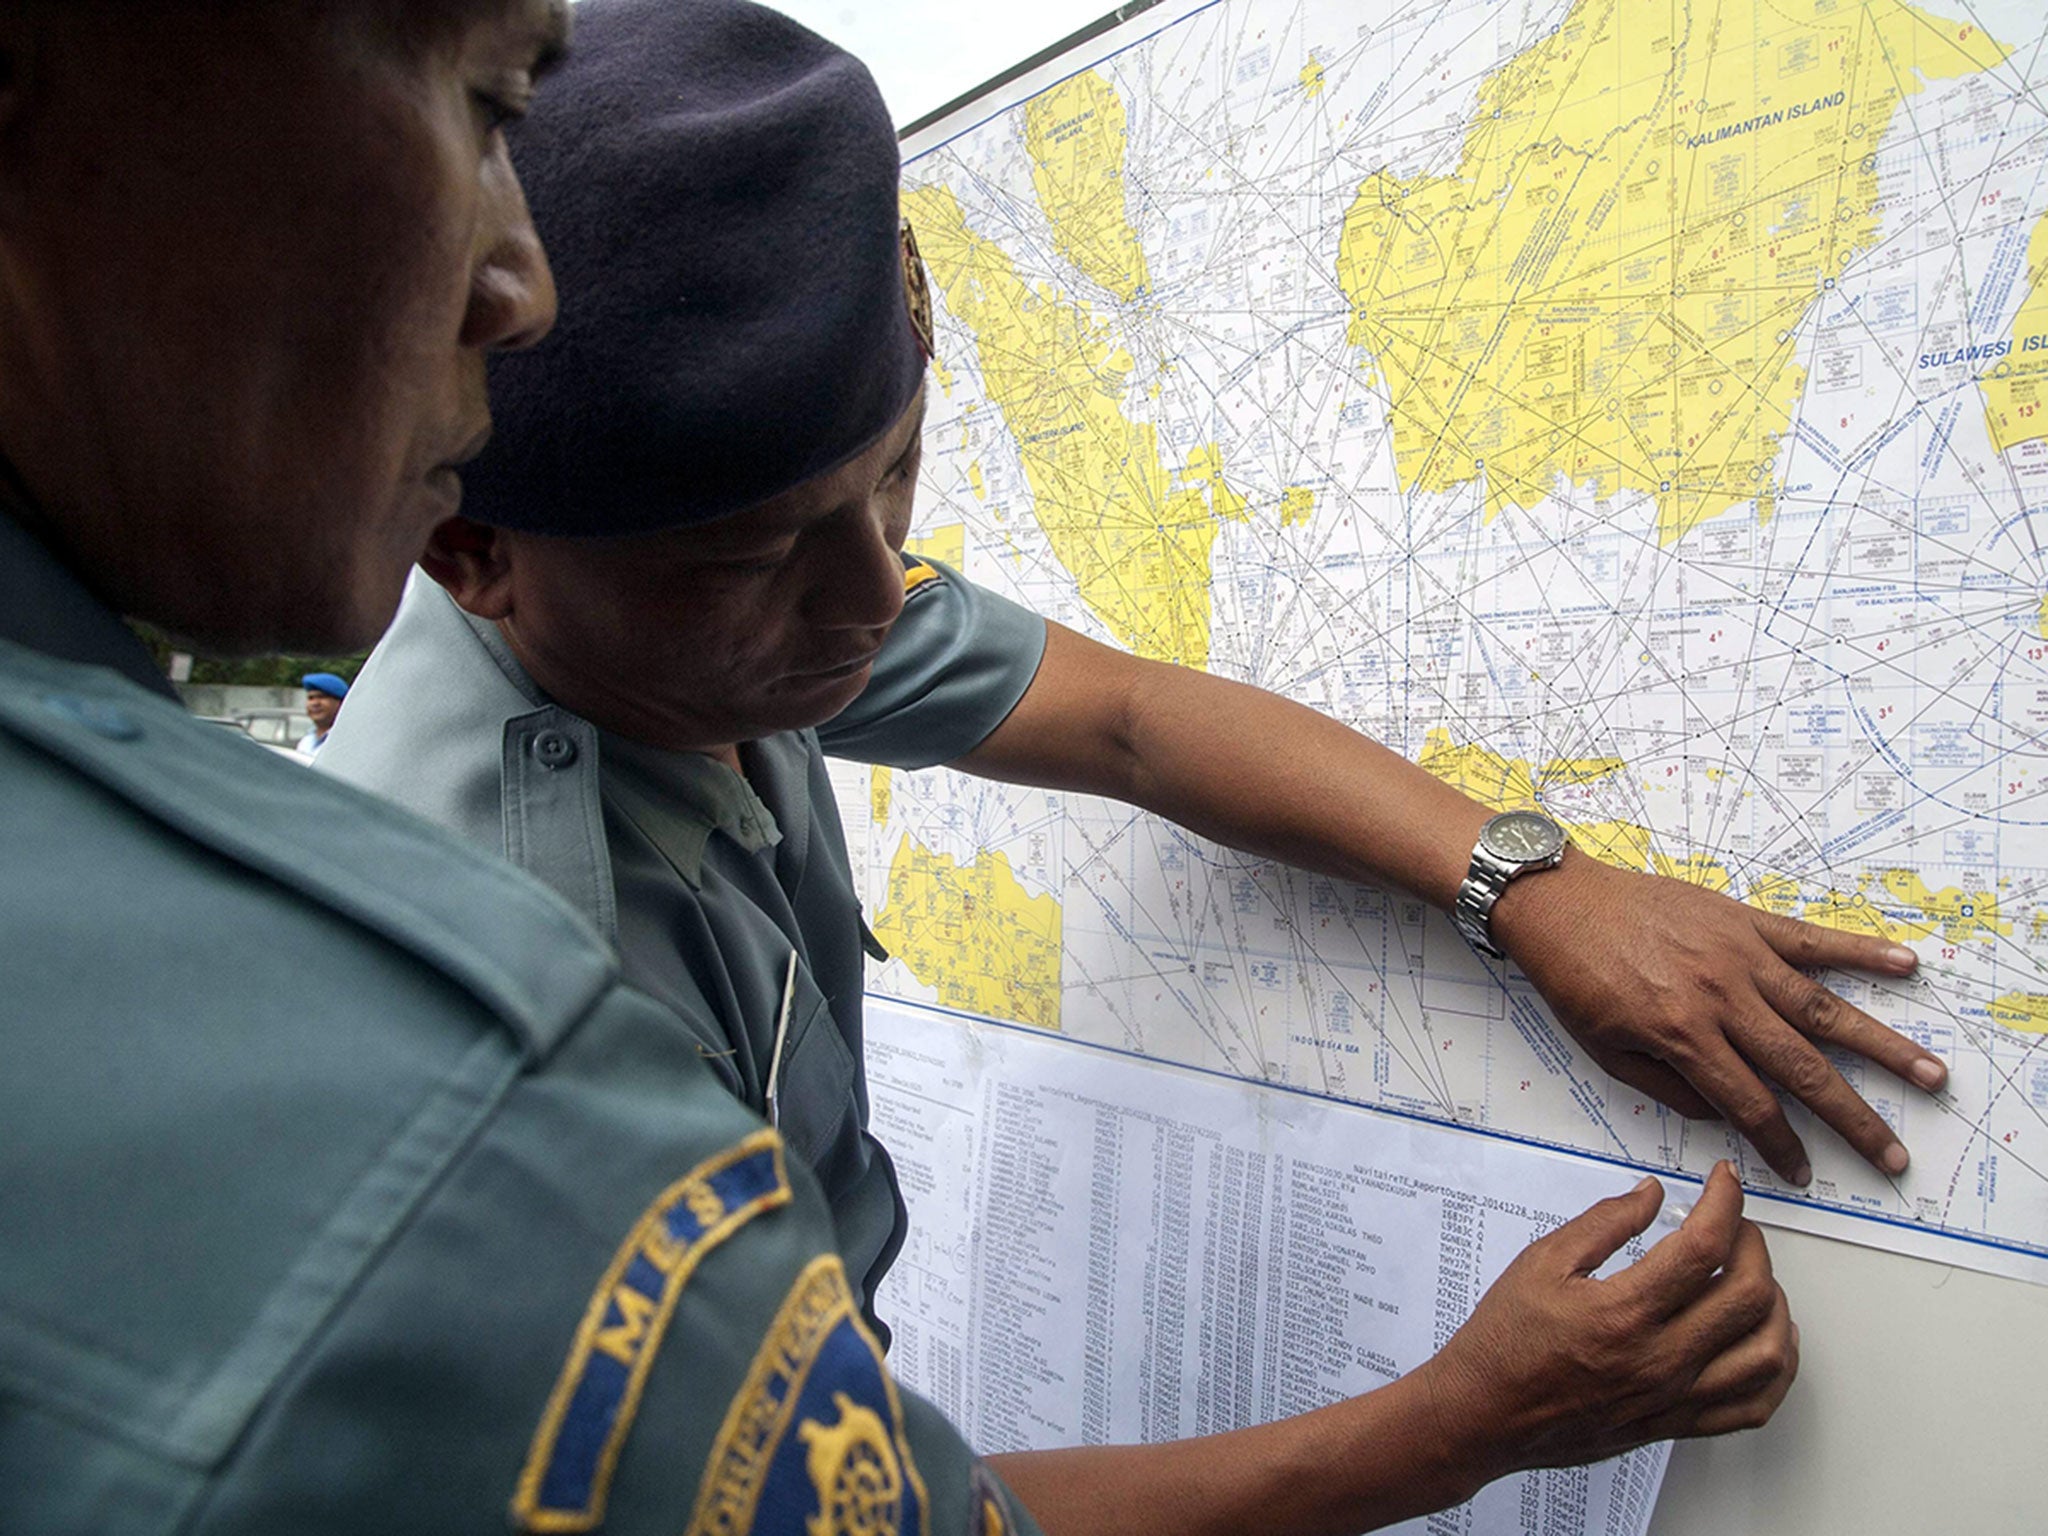 Indonesian Navy soldiers install maps showing the search area for the missing AirAsia flight, at Juanda Airport, in Surabaya, Indonesia